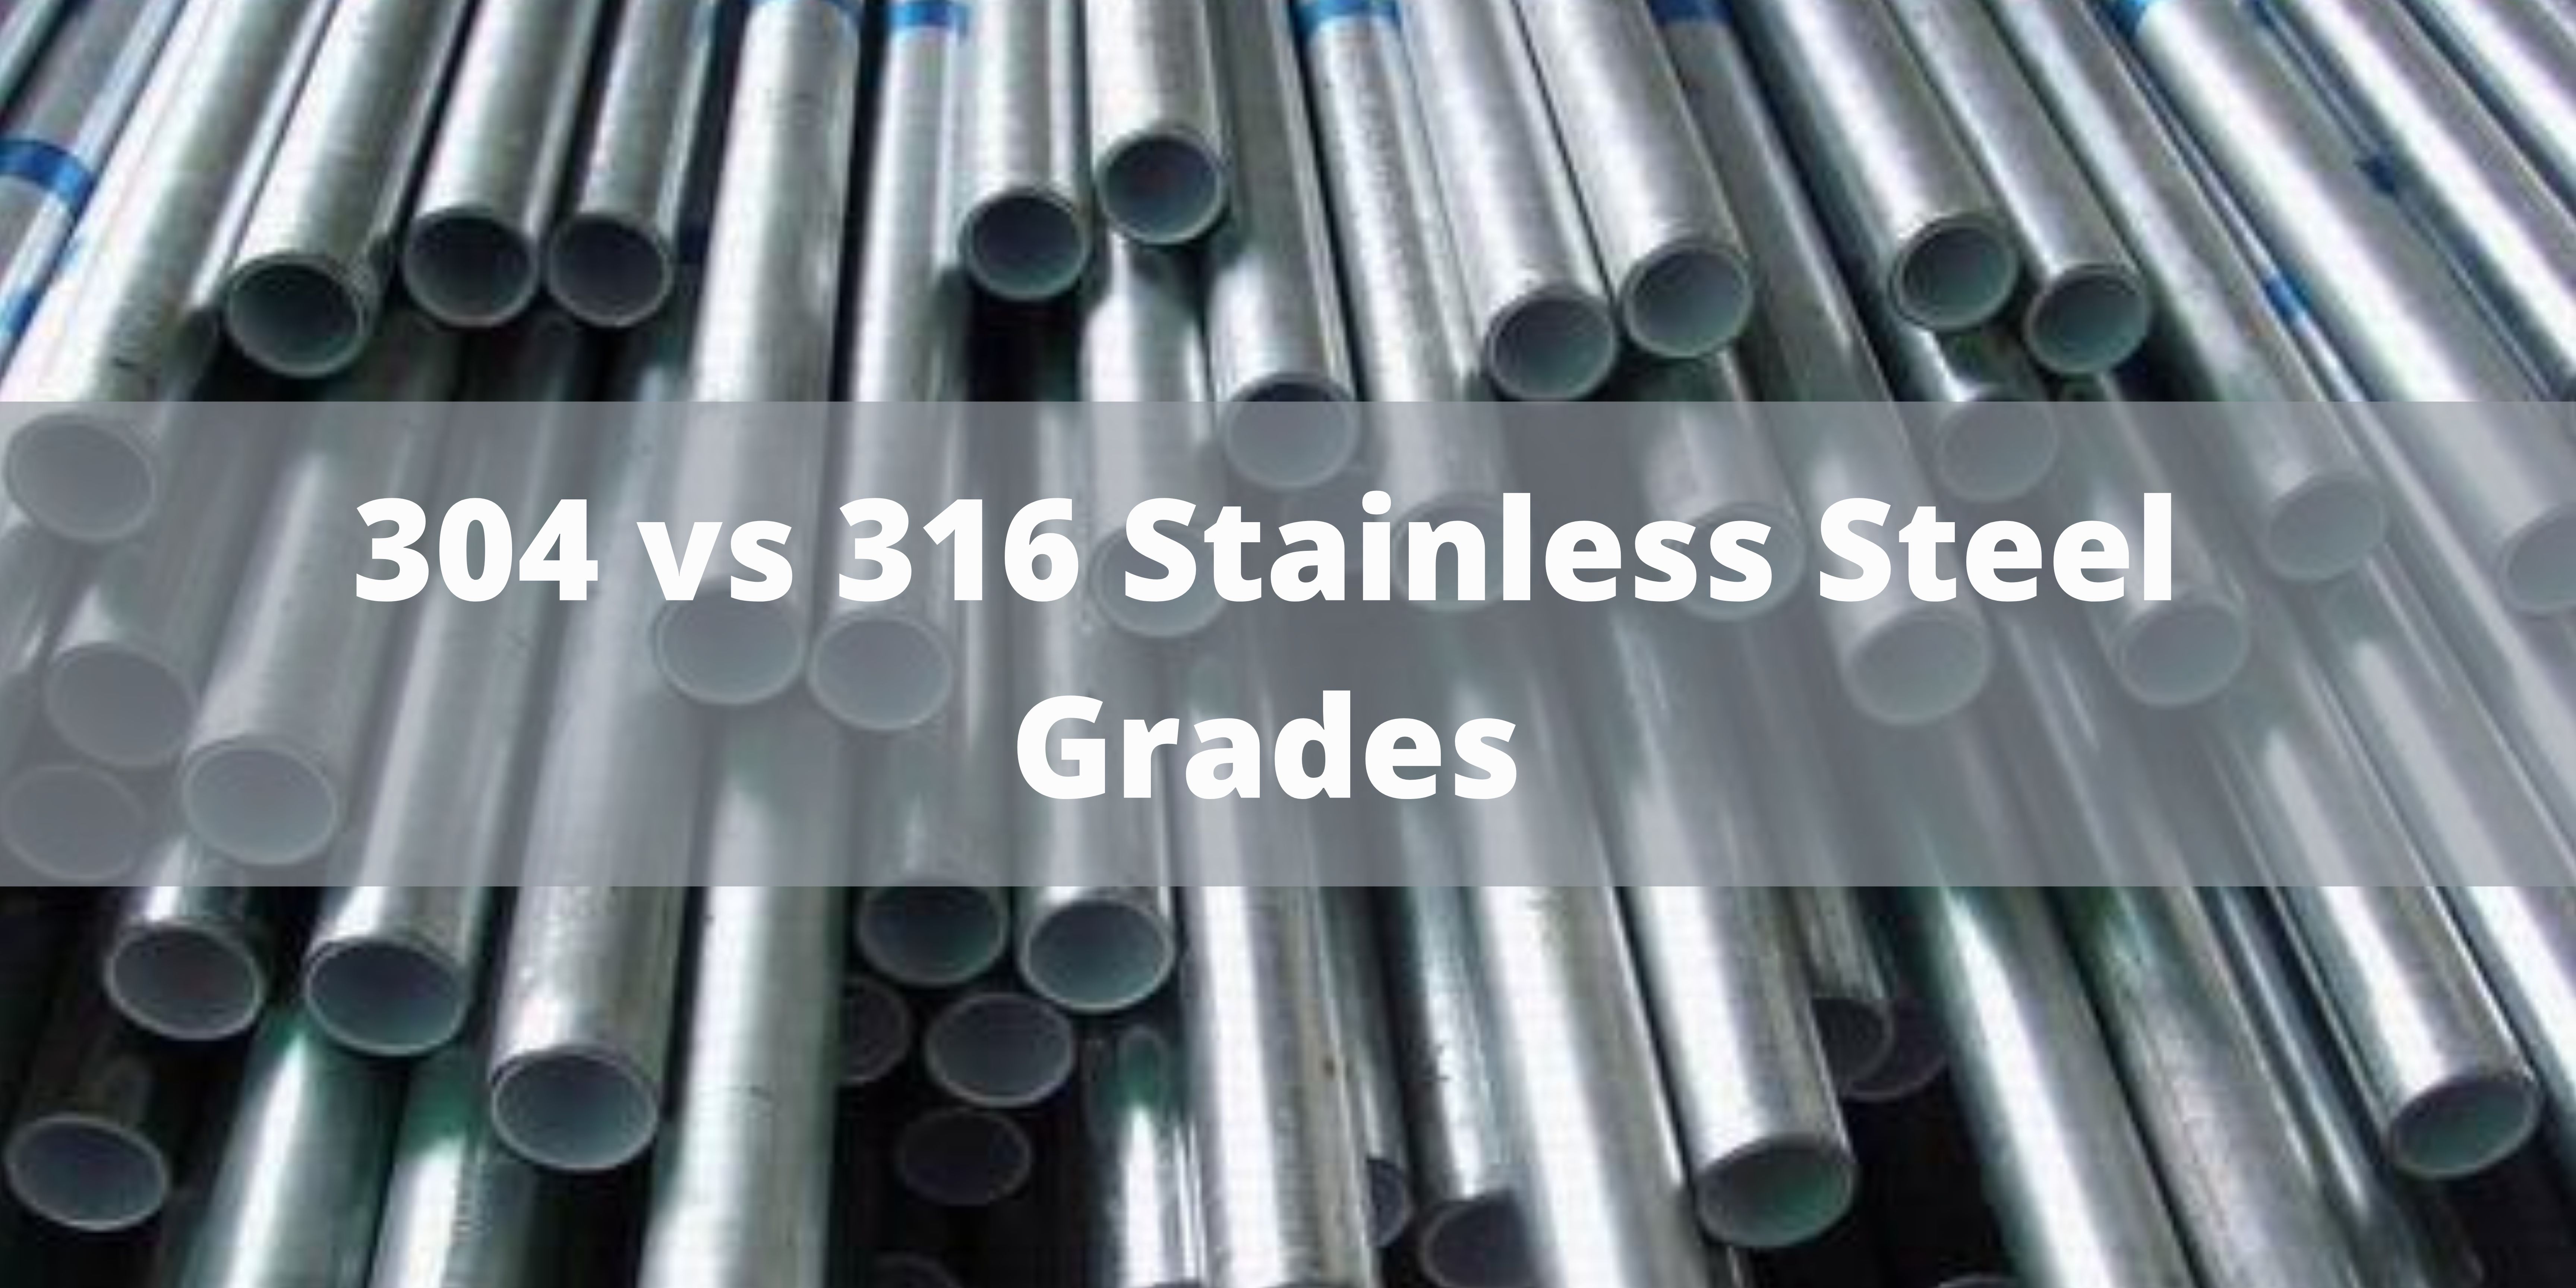 Stainless Steel 316: What Is It? How Is It Made? Grades